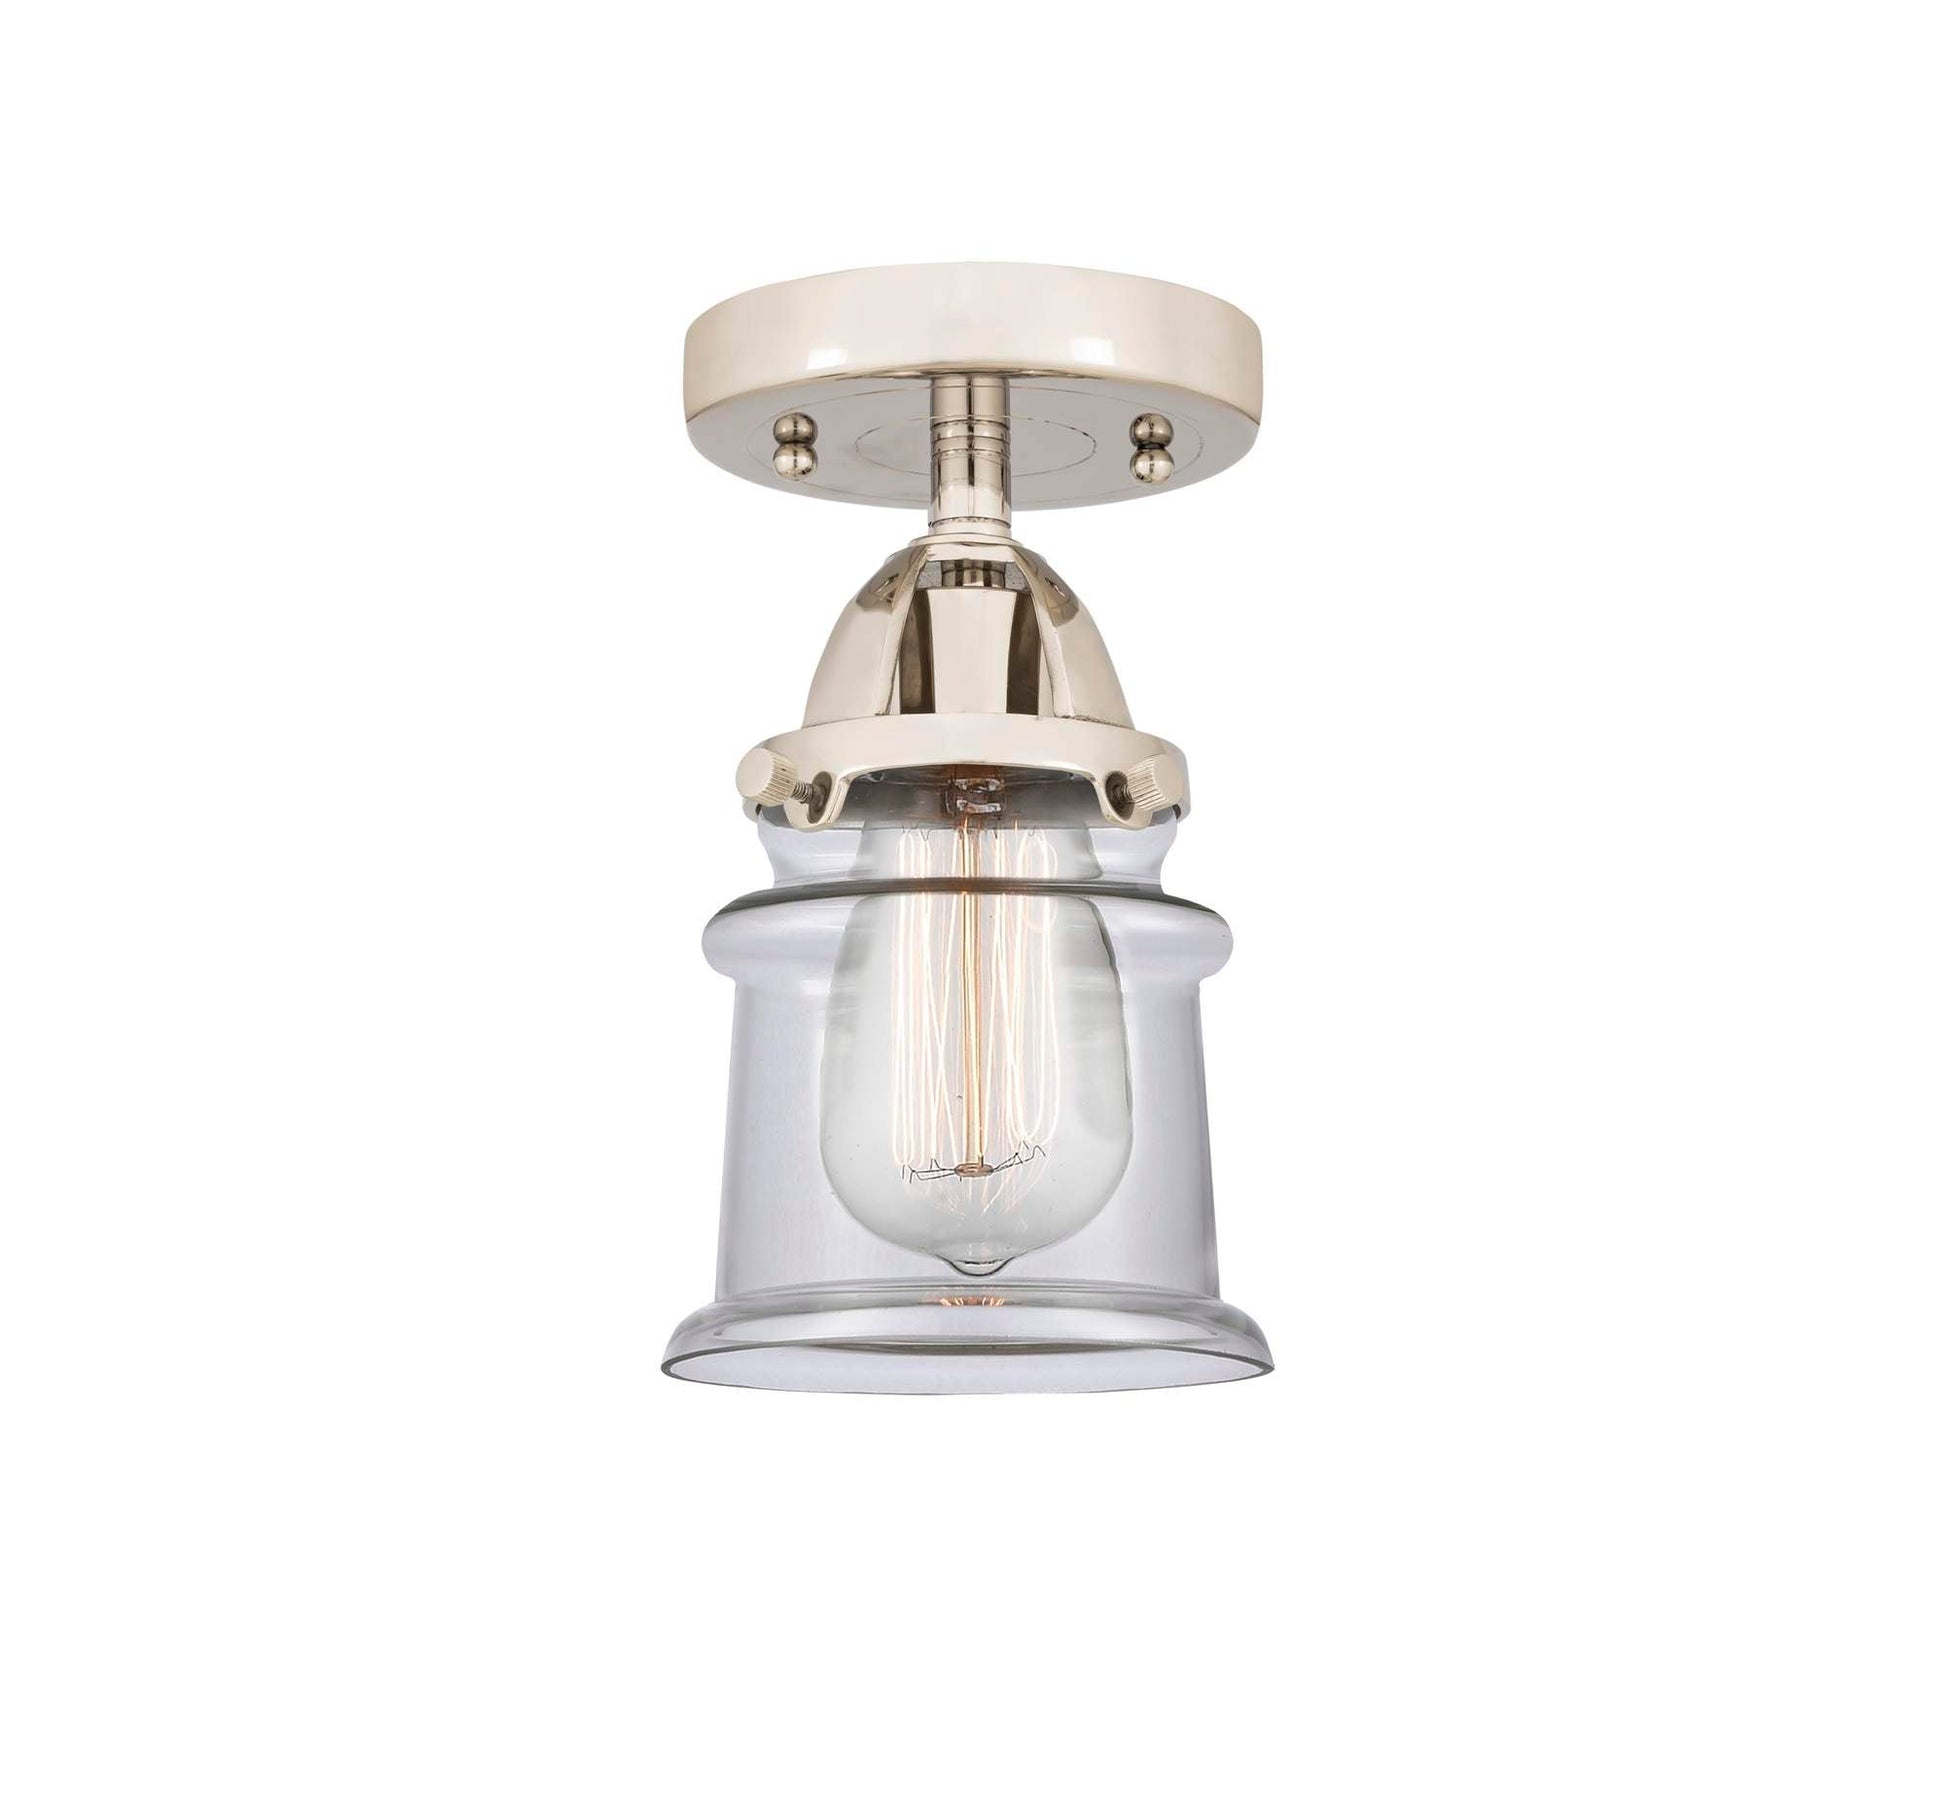 288-1C-PN-G182S 1-Light 5.25" Polished Nickel Semi-Flush Mount - Clear Small Canton Glass - LED Bulb - Dimmensions: 5.25 x 5.25 x 9 - Sloped Ceiling Compatible: No